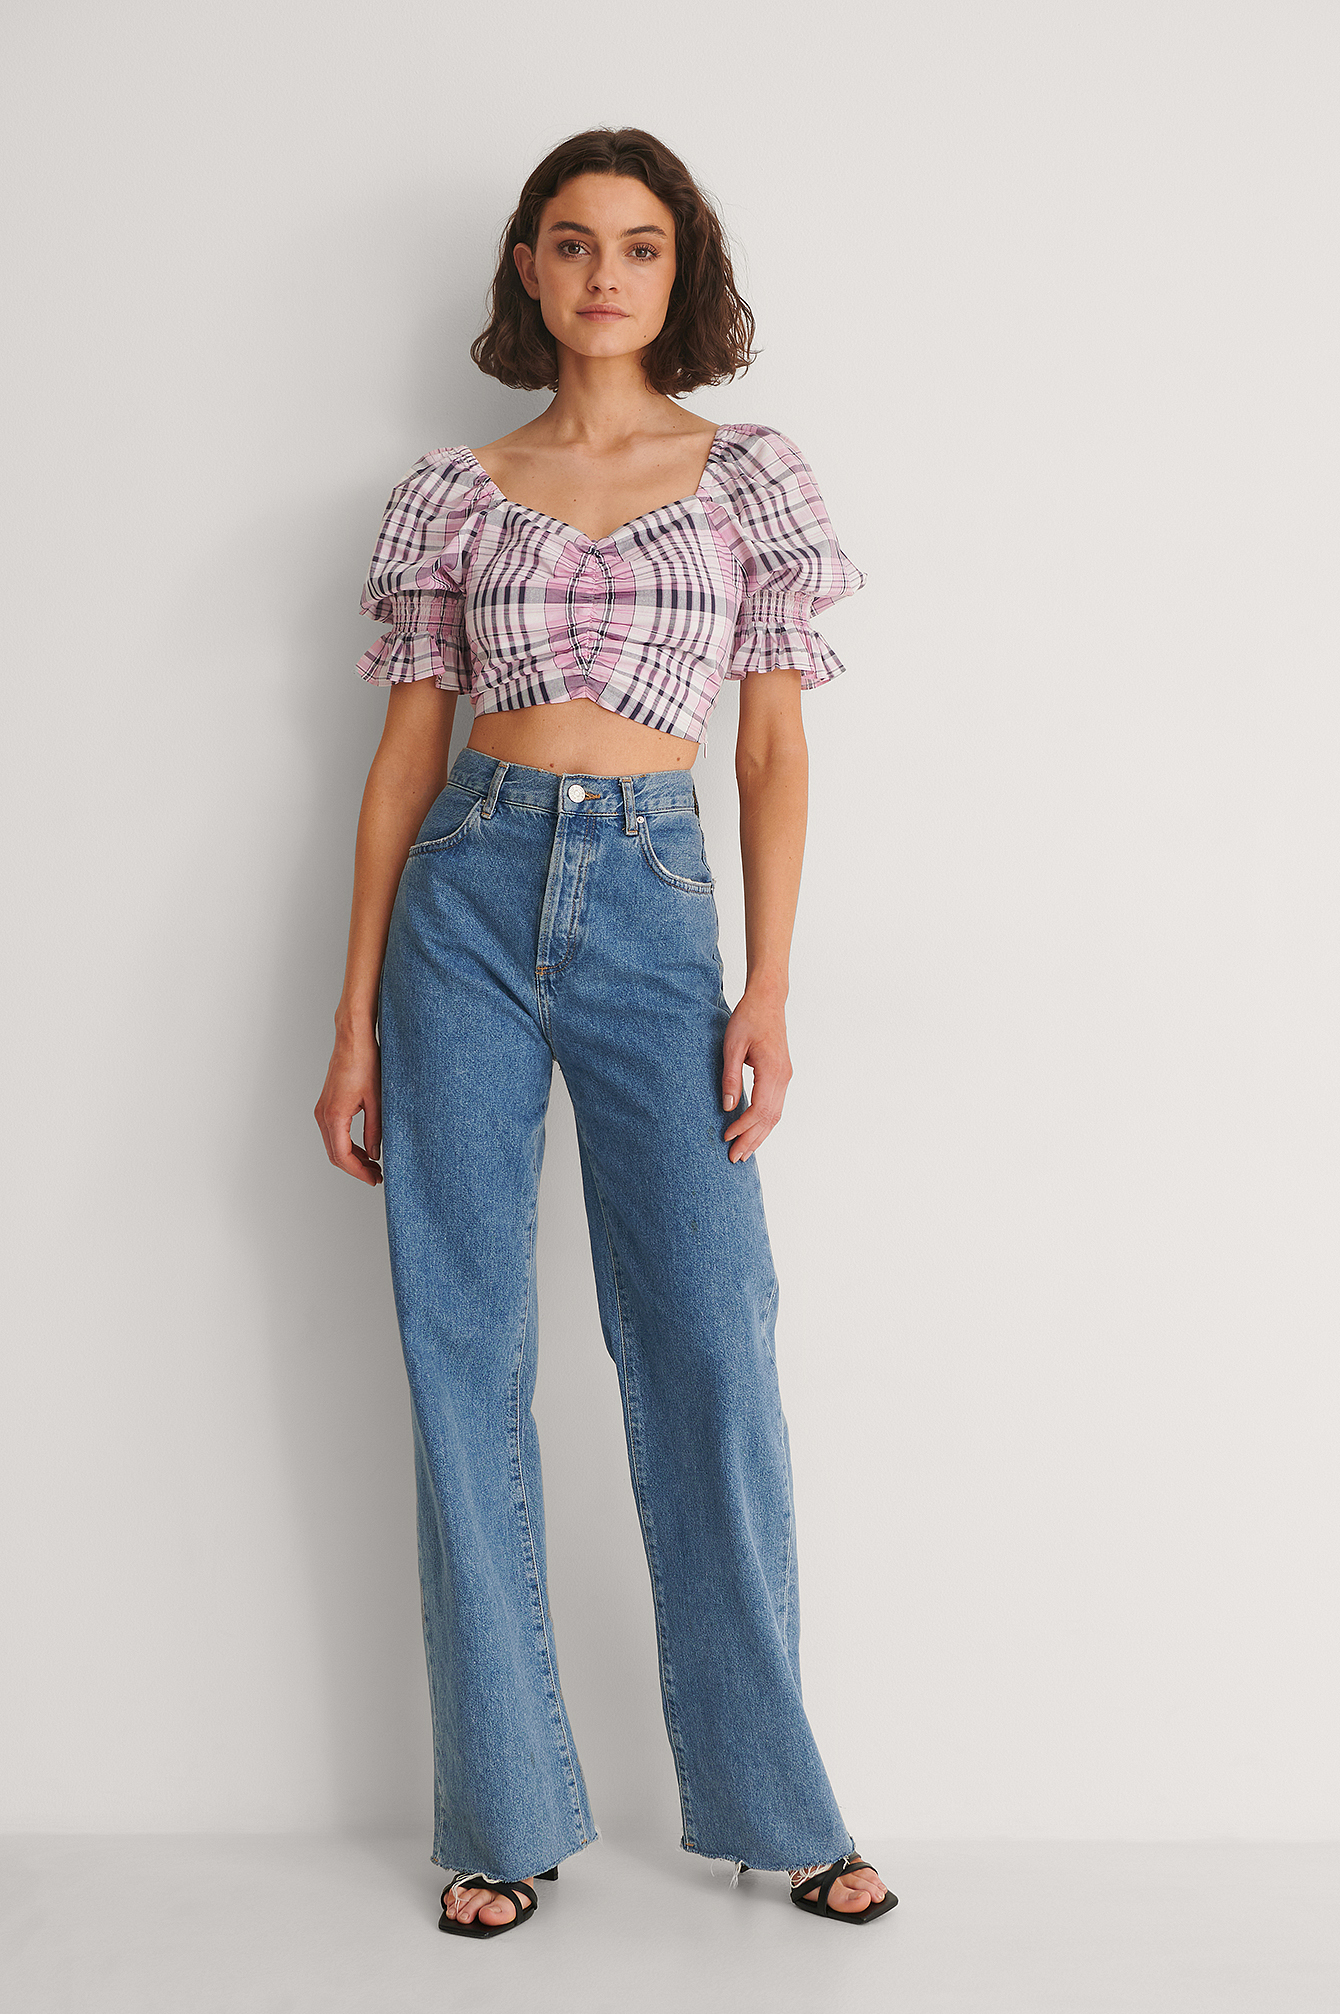 Checked Cropped Top Outfit.